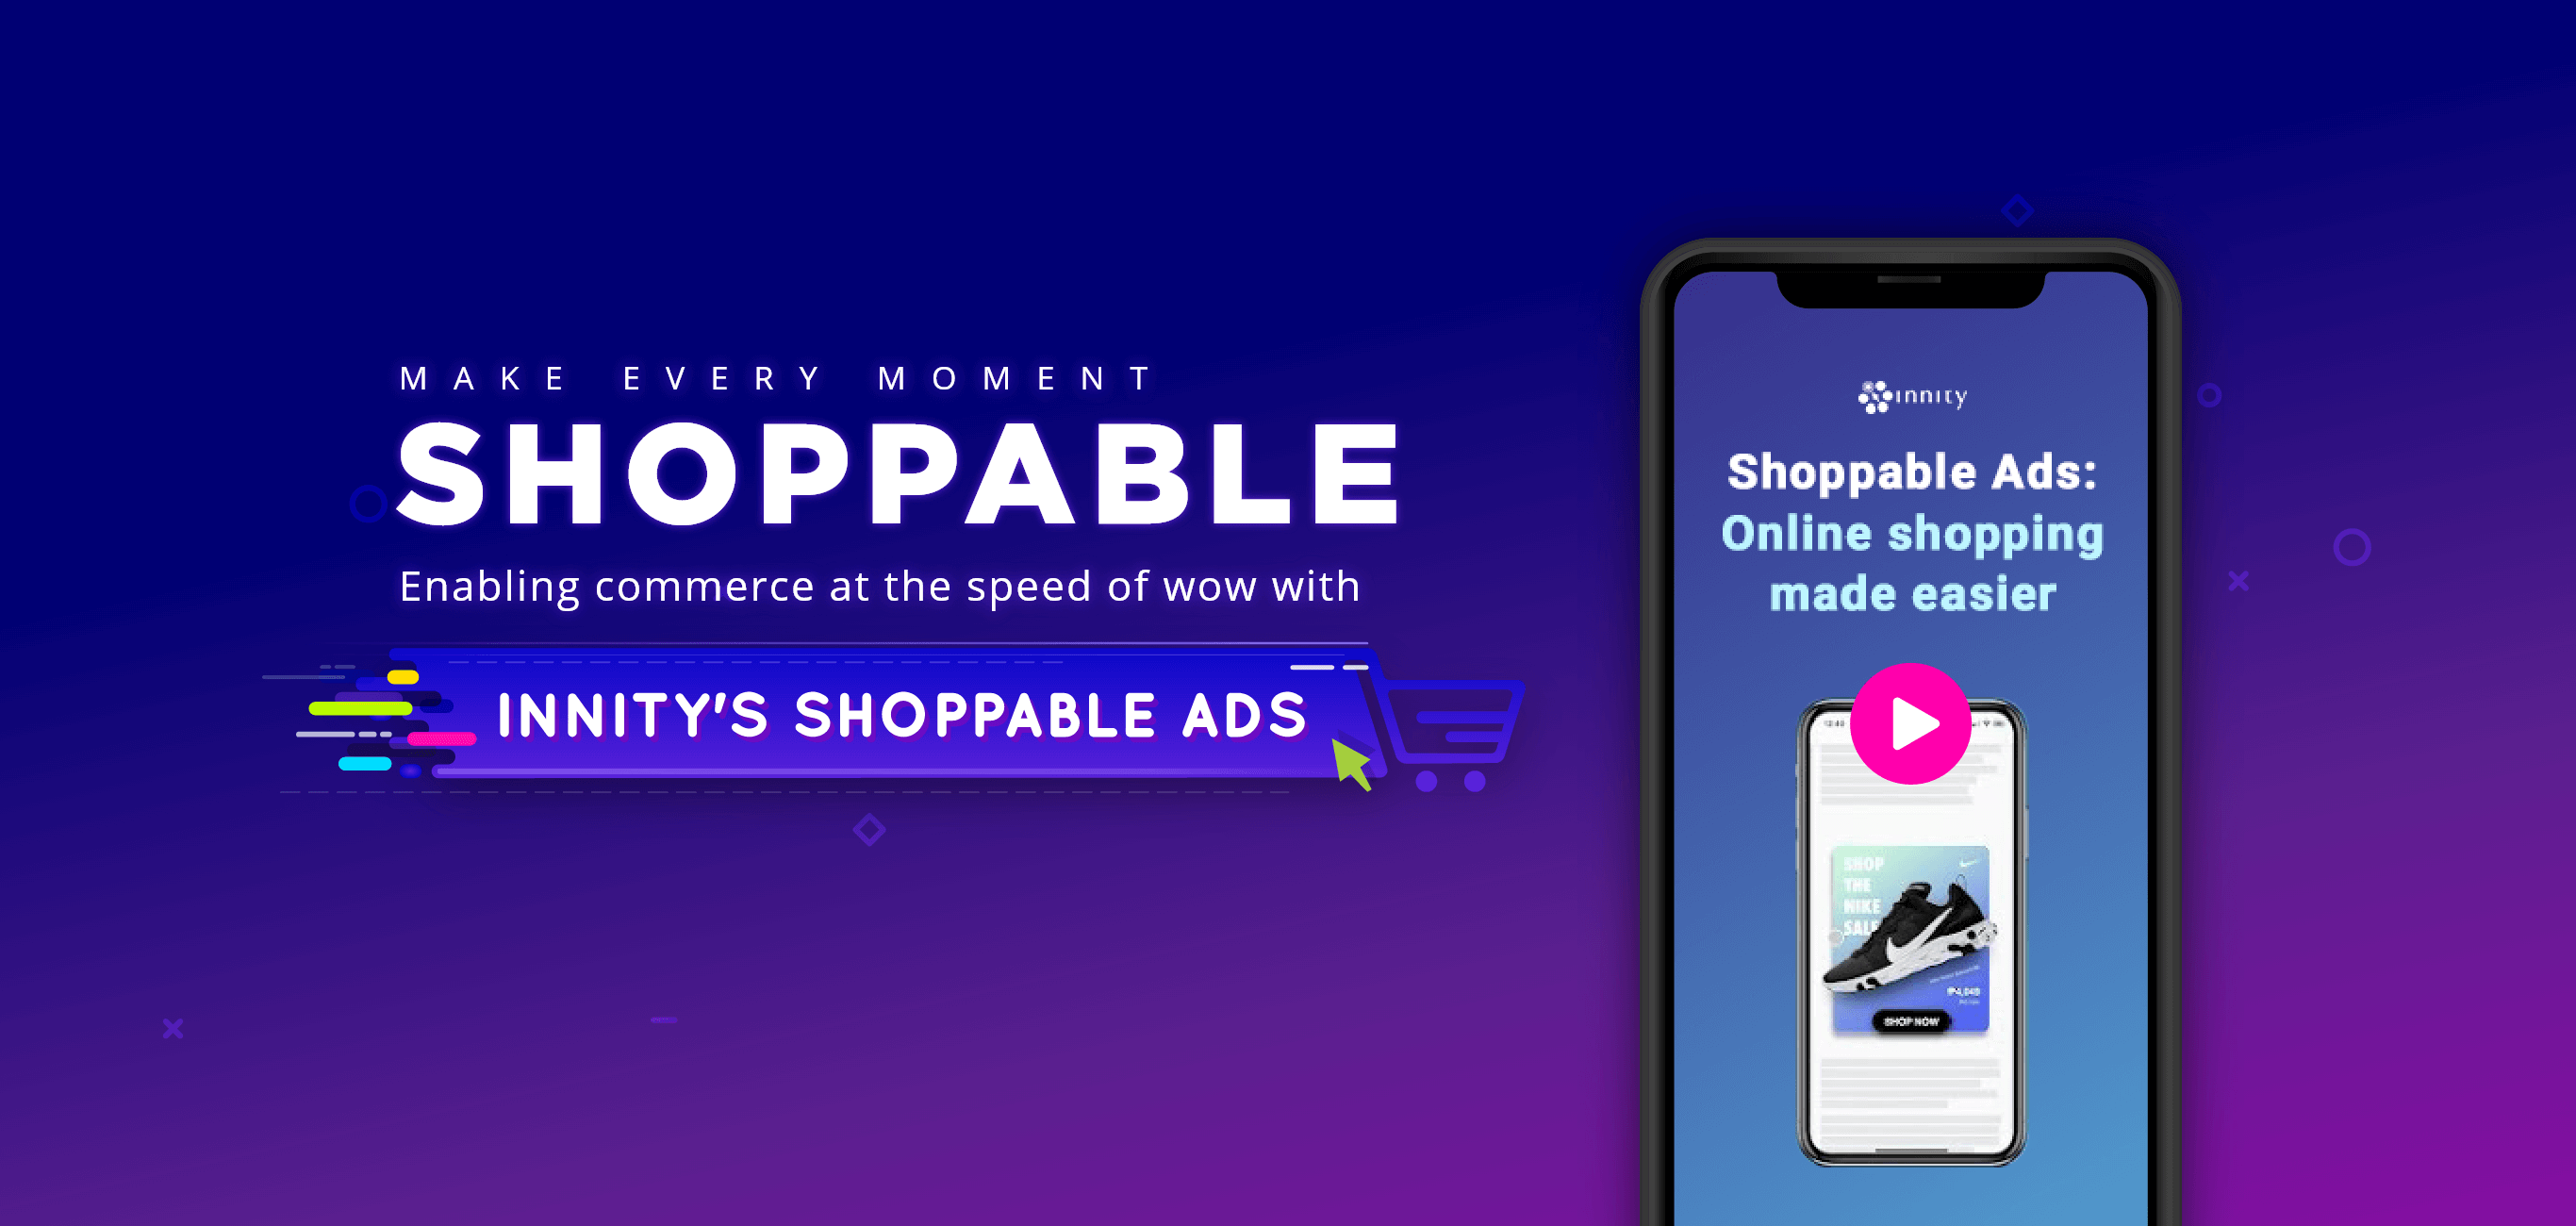 online shopping made easier with shoppable ads